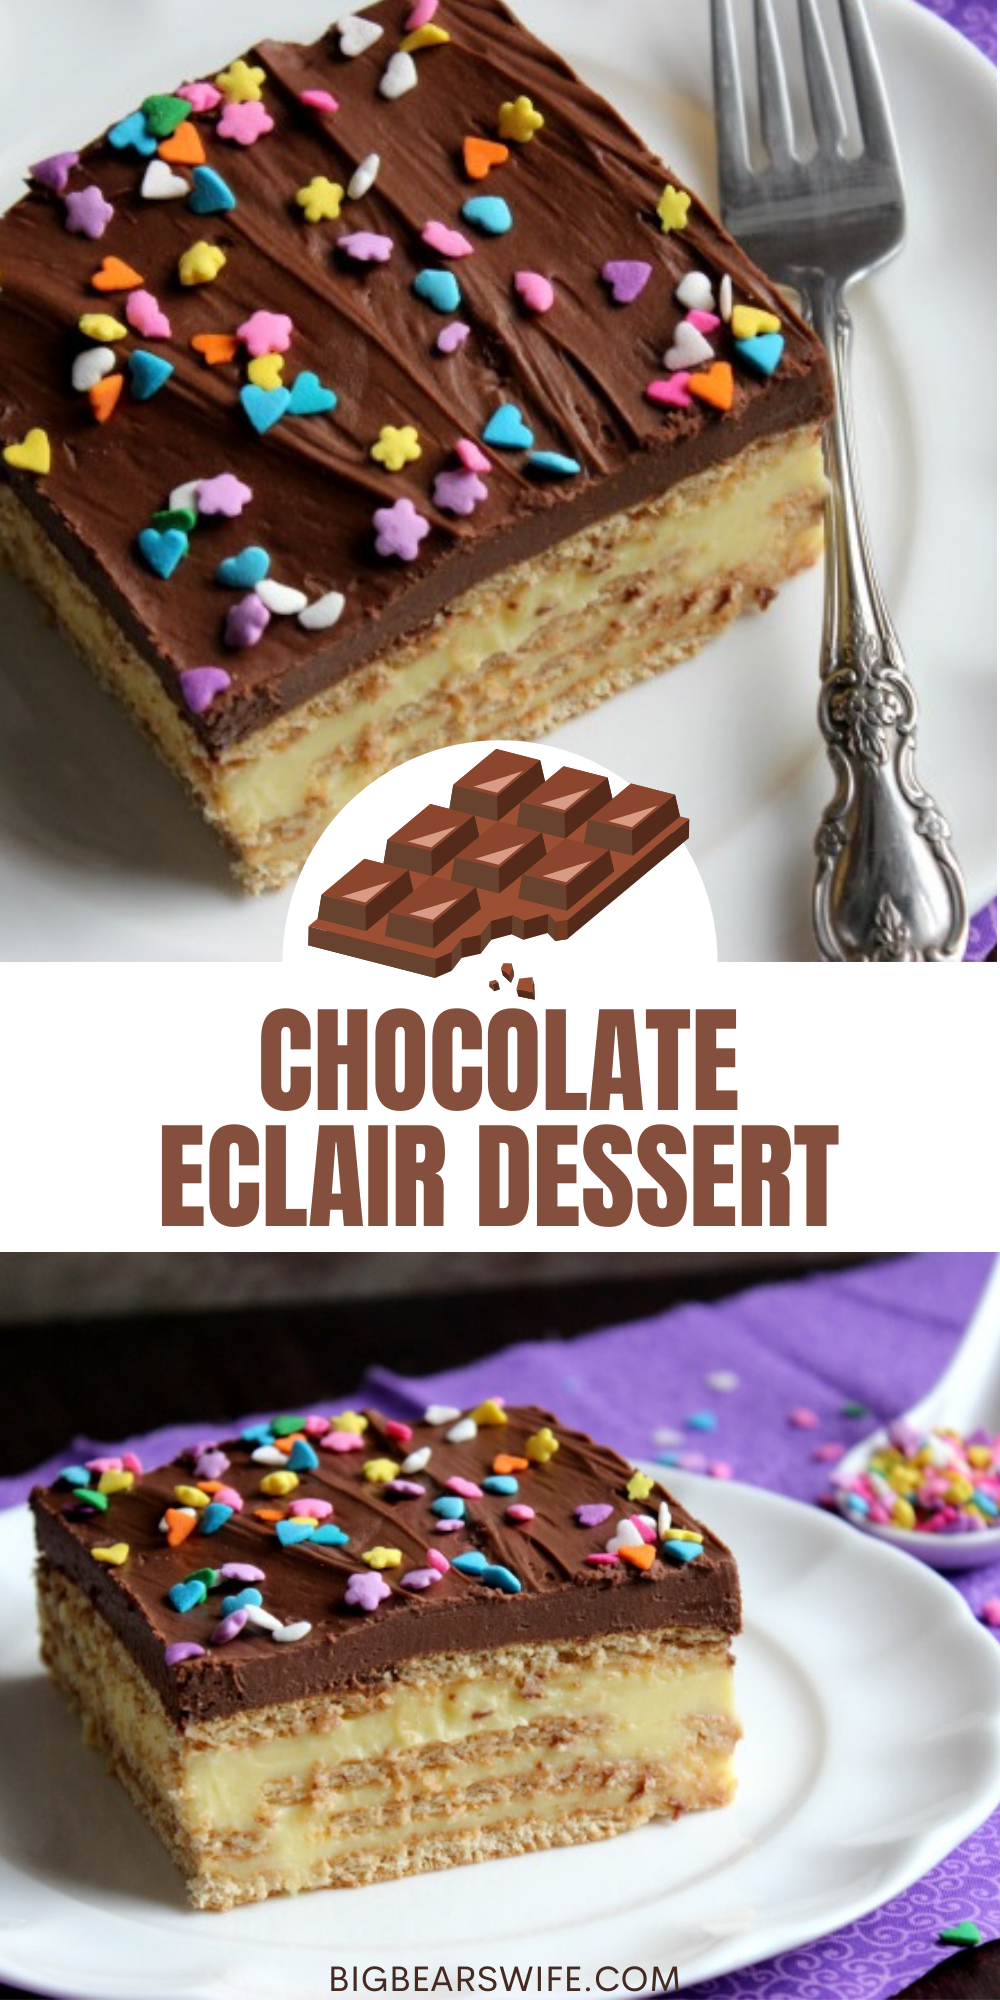 This Chocolate Eclair Dessert is an amazing no bake dessert is a southern favorite! Layers if pudding, graham crackers and chocolate frosting come together for a dessert that you’re sure to love!
 via @bigbearswife